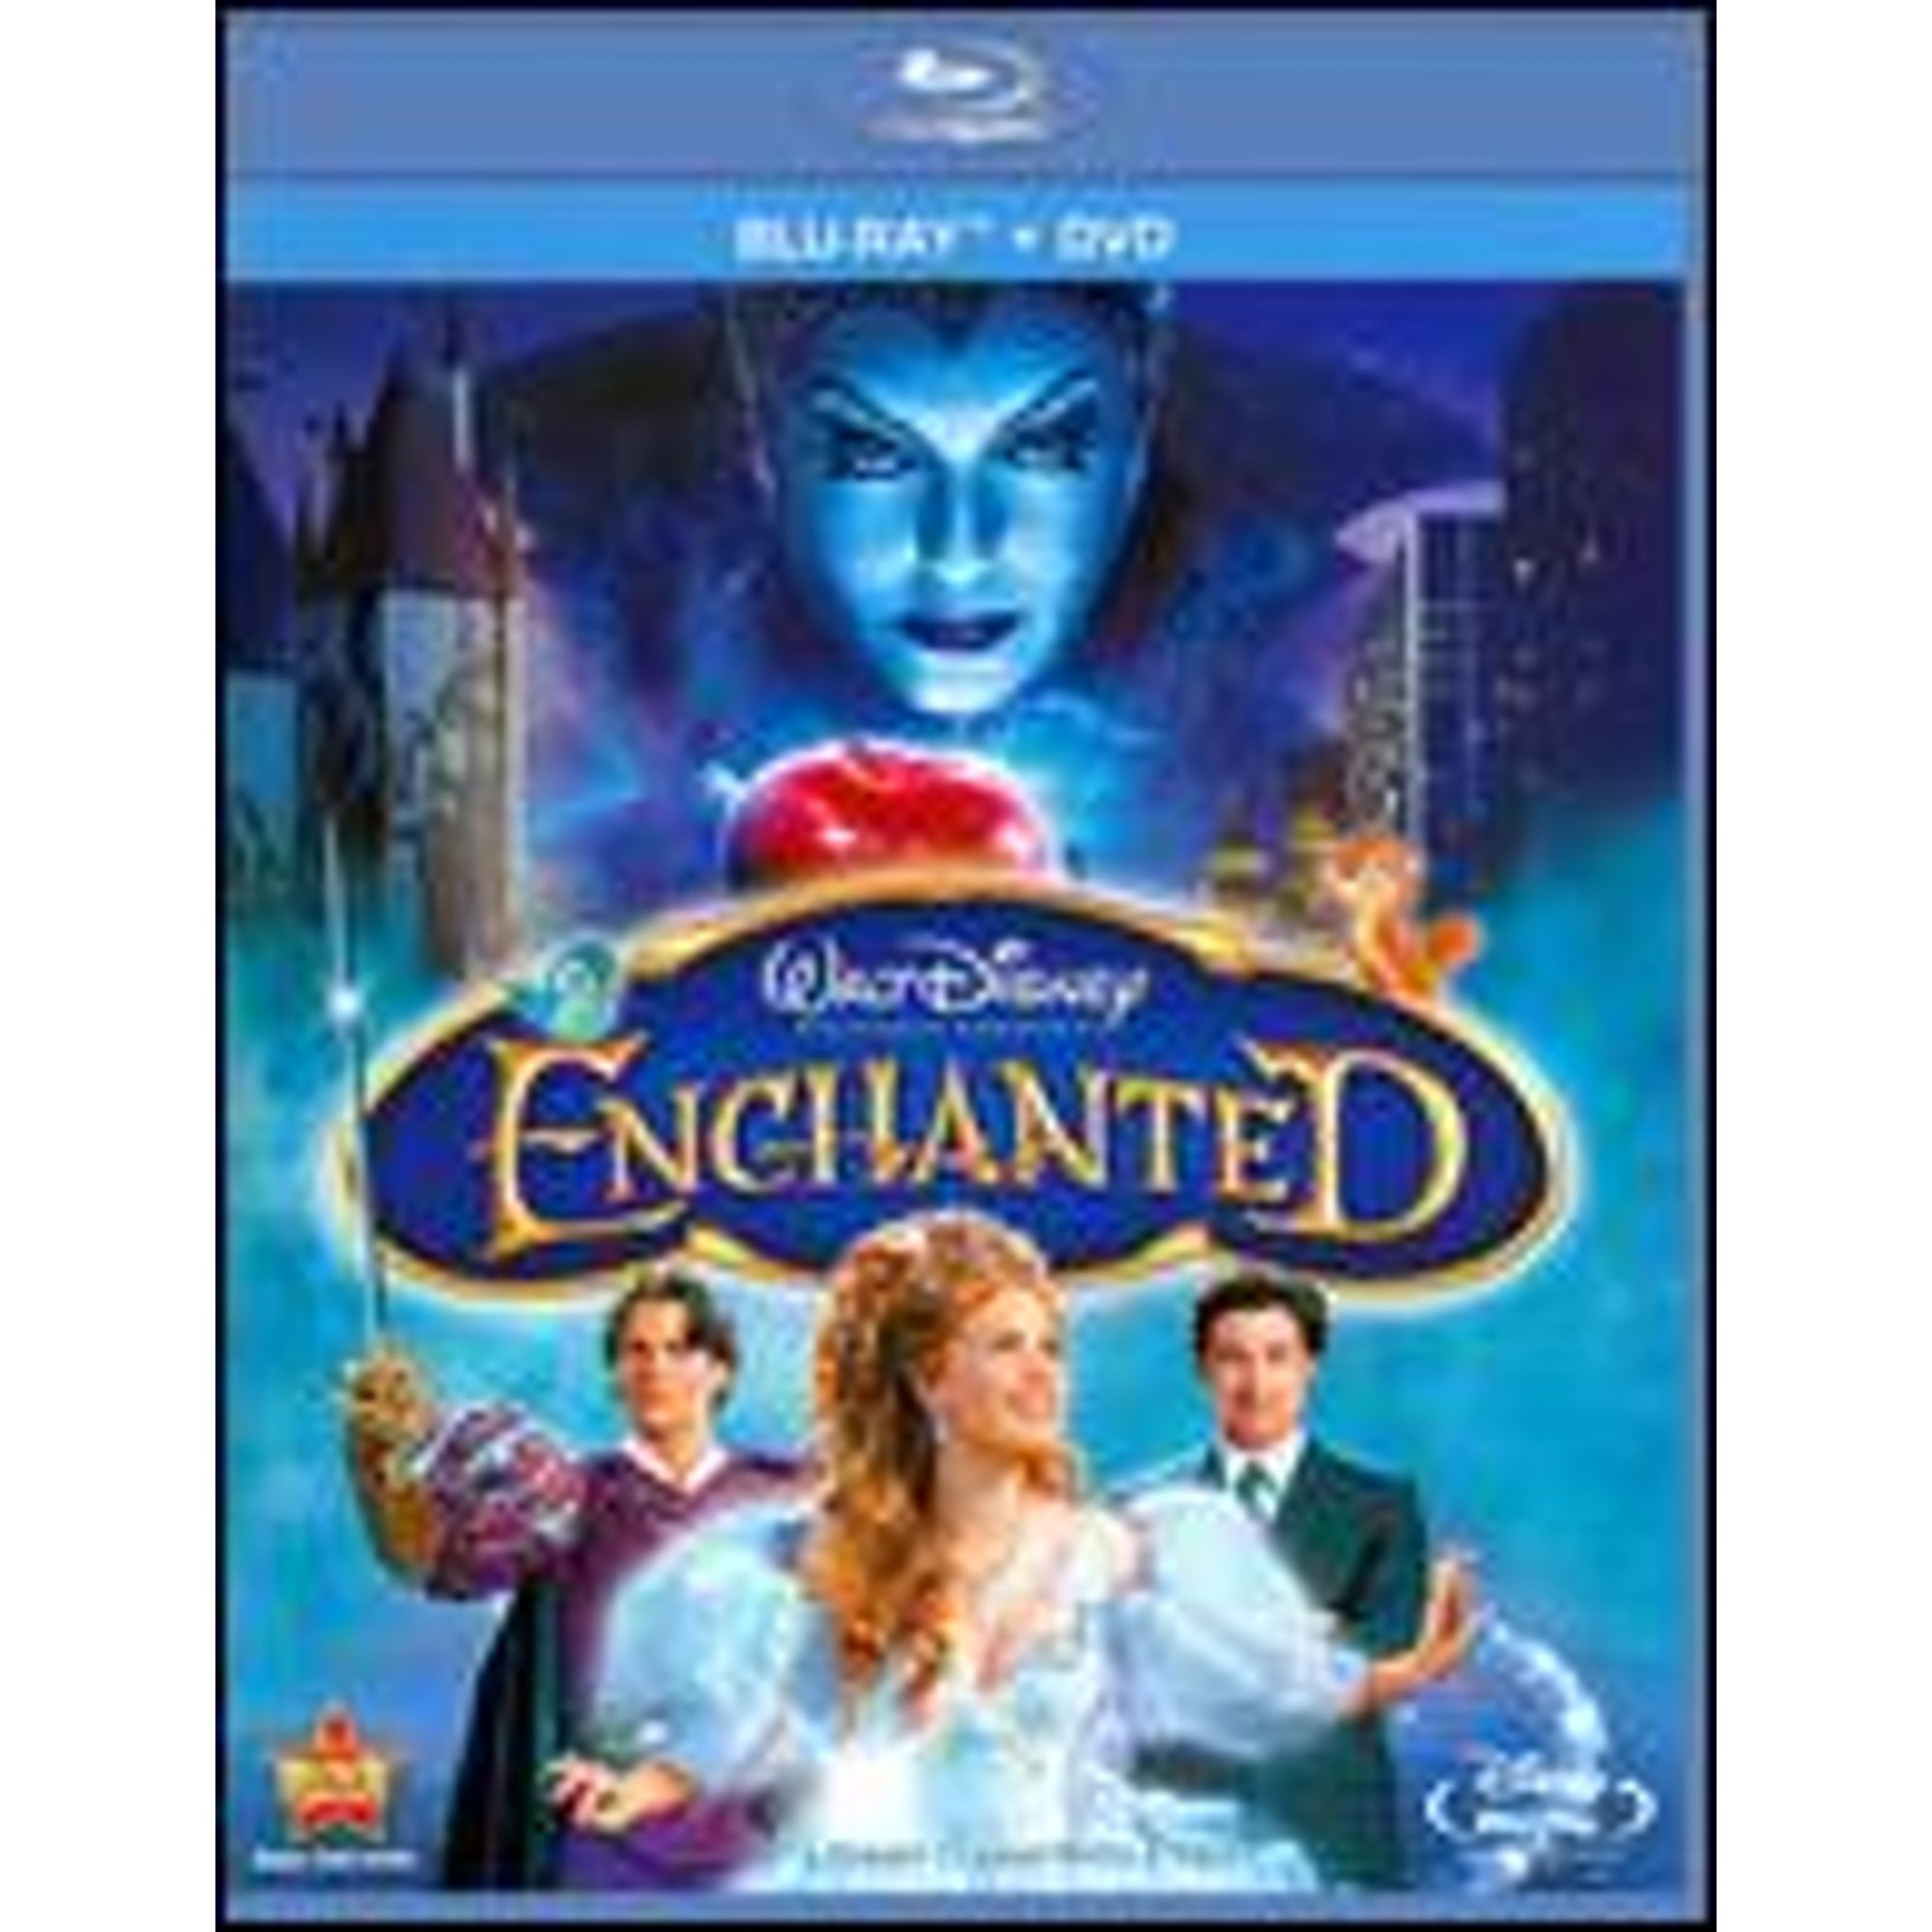 Pre-Owned Enchanted [WS] [2 Discs] [Blu-ray/DVD] (Blu-Ray 0786936811308)  directed by Kevin Lima